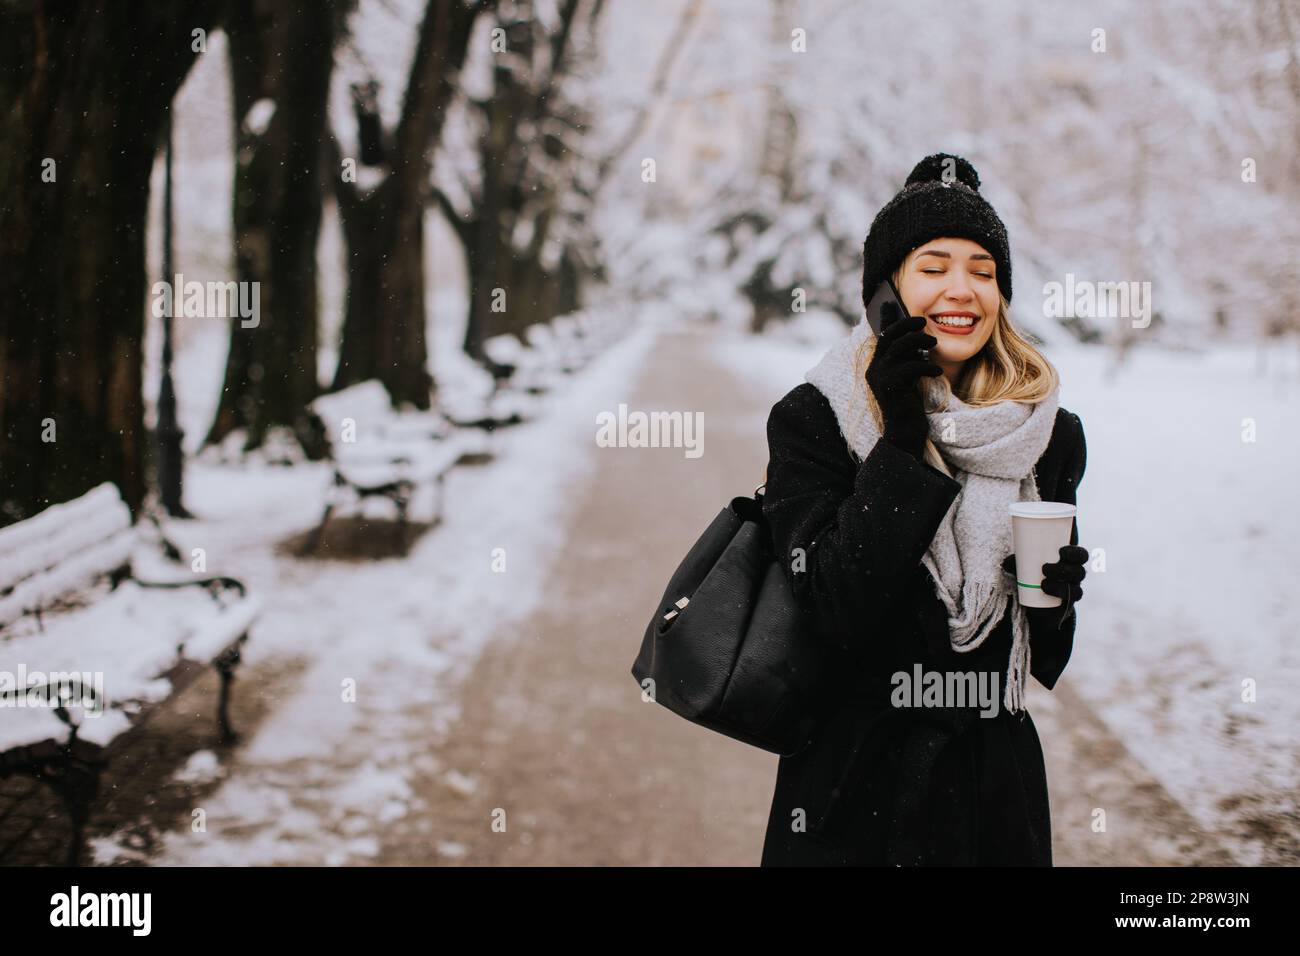 A young woman wearing warm winter clothes and a knit hat smiles happily as she stands in the snow and using mobile phone whil holding cofee cup Stock Photo